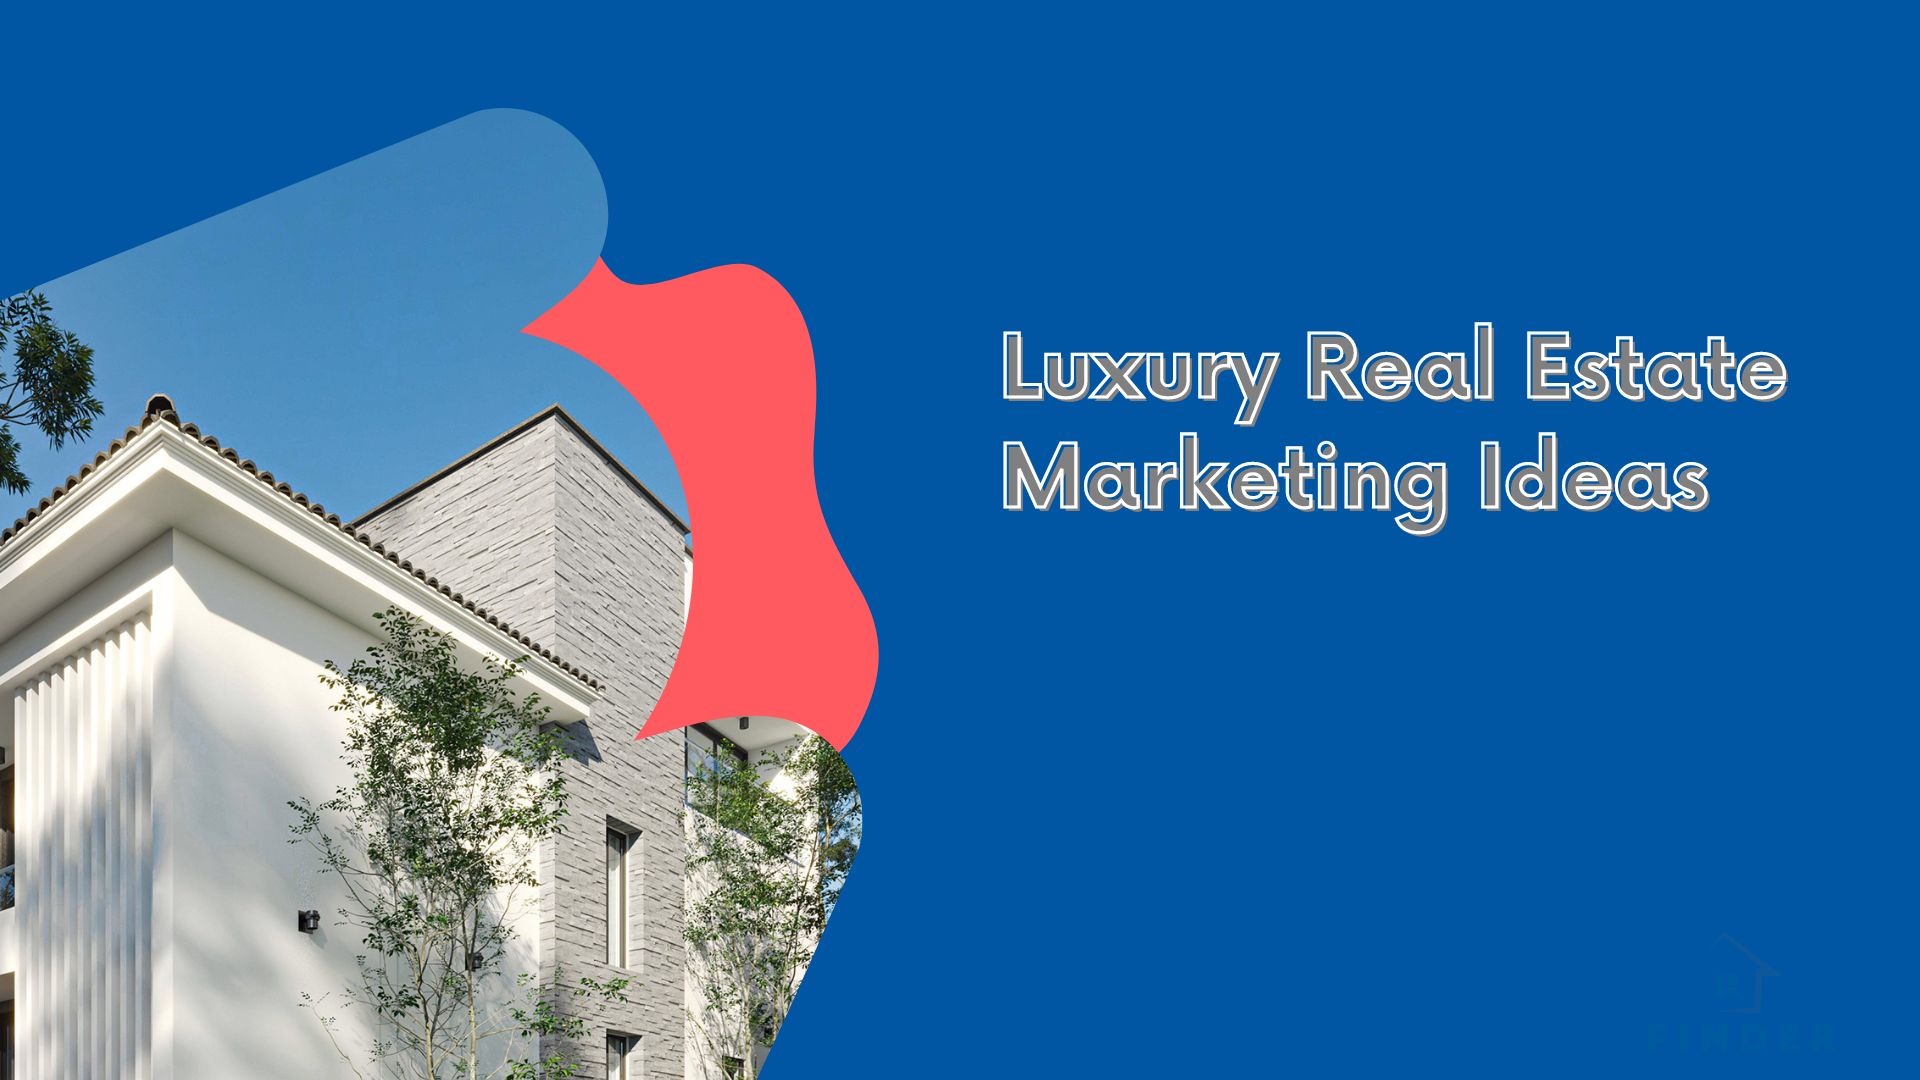 Title: Luxury Real Estate Marketing Ideas: Tips and Strategies to Attract High-End Buyers